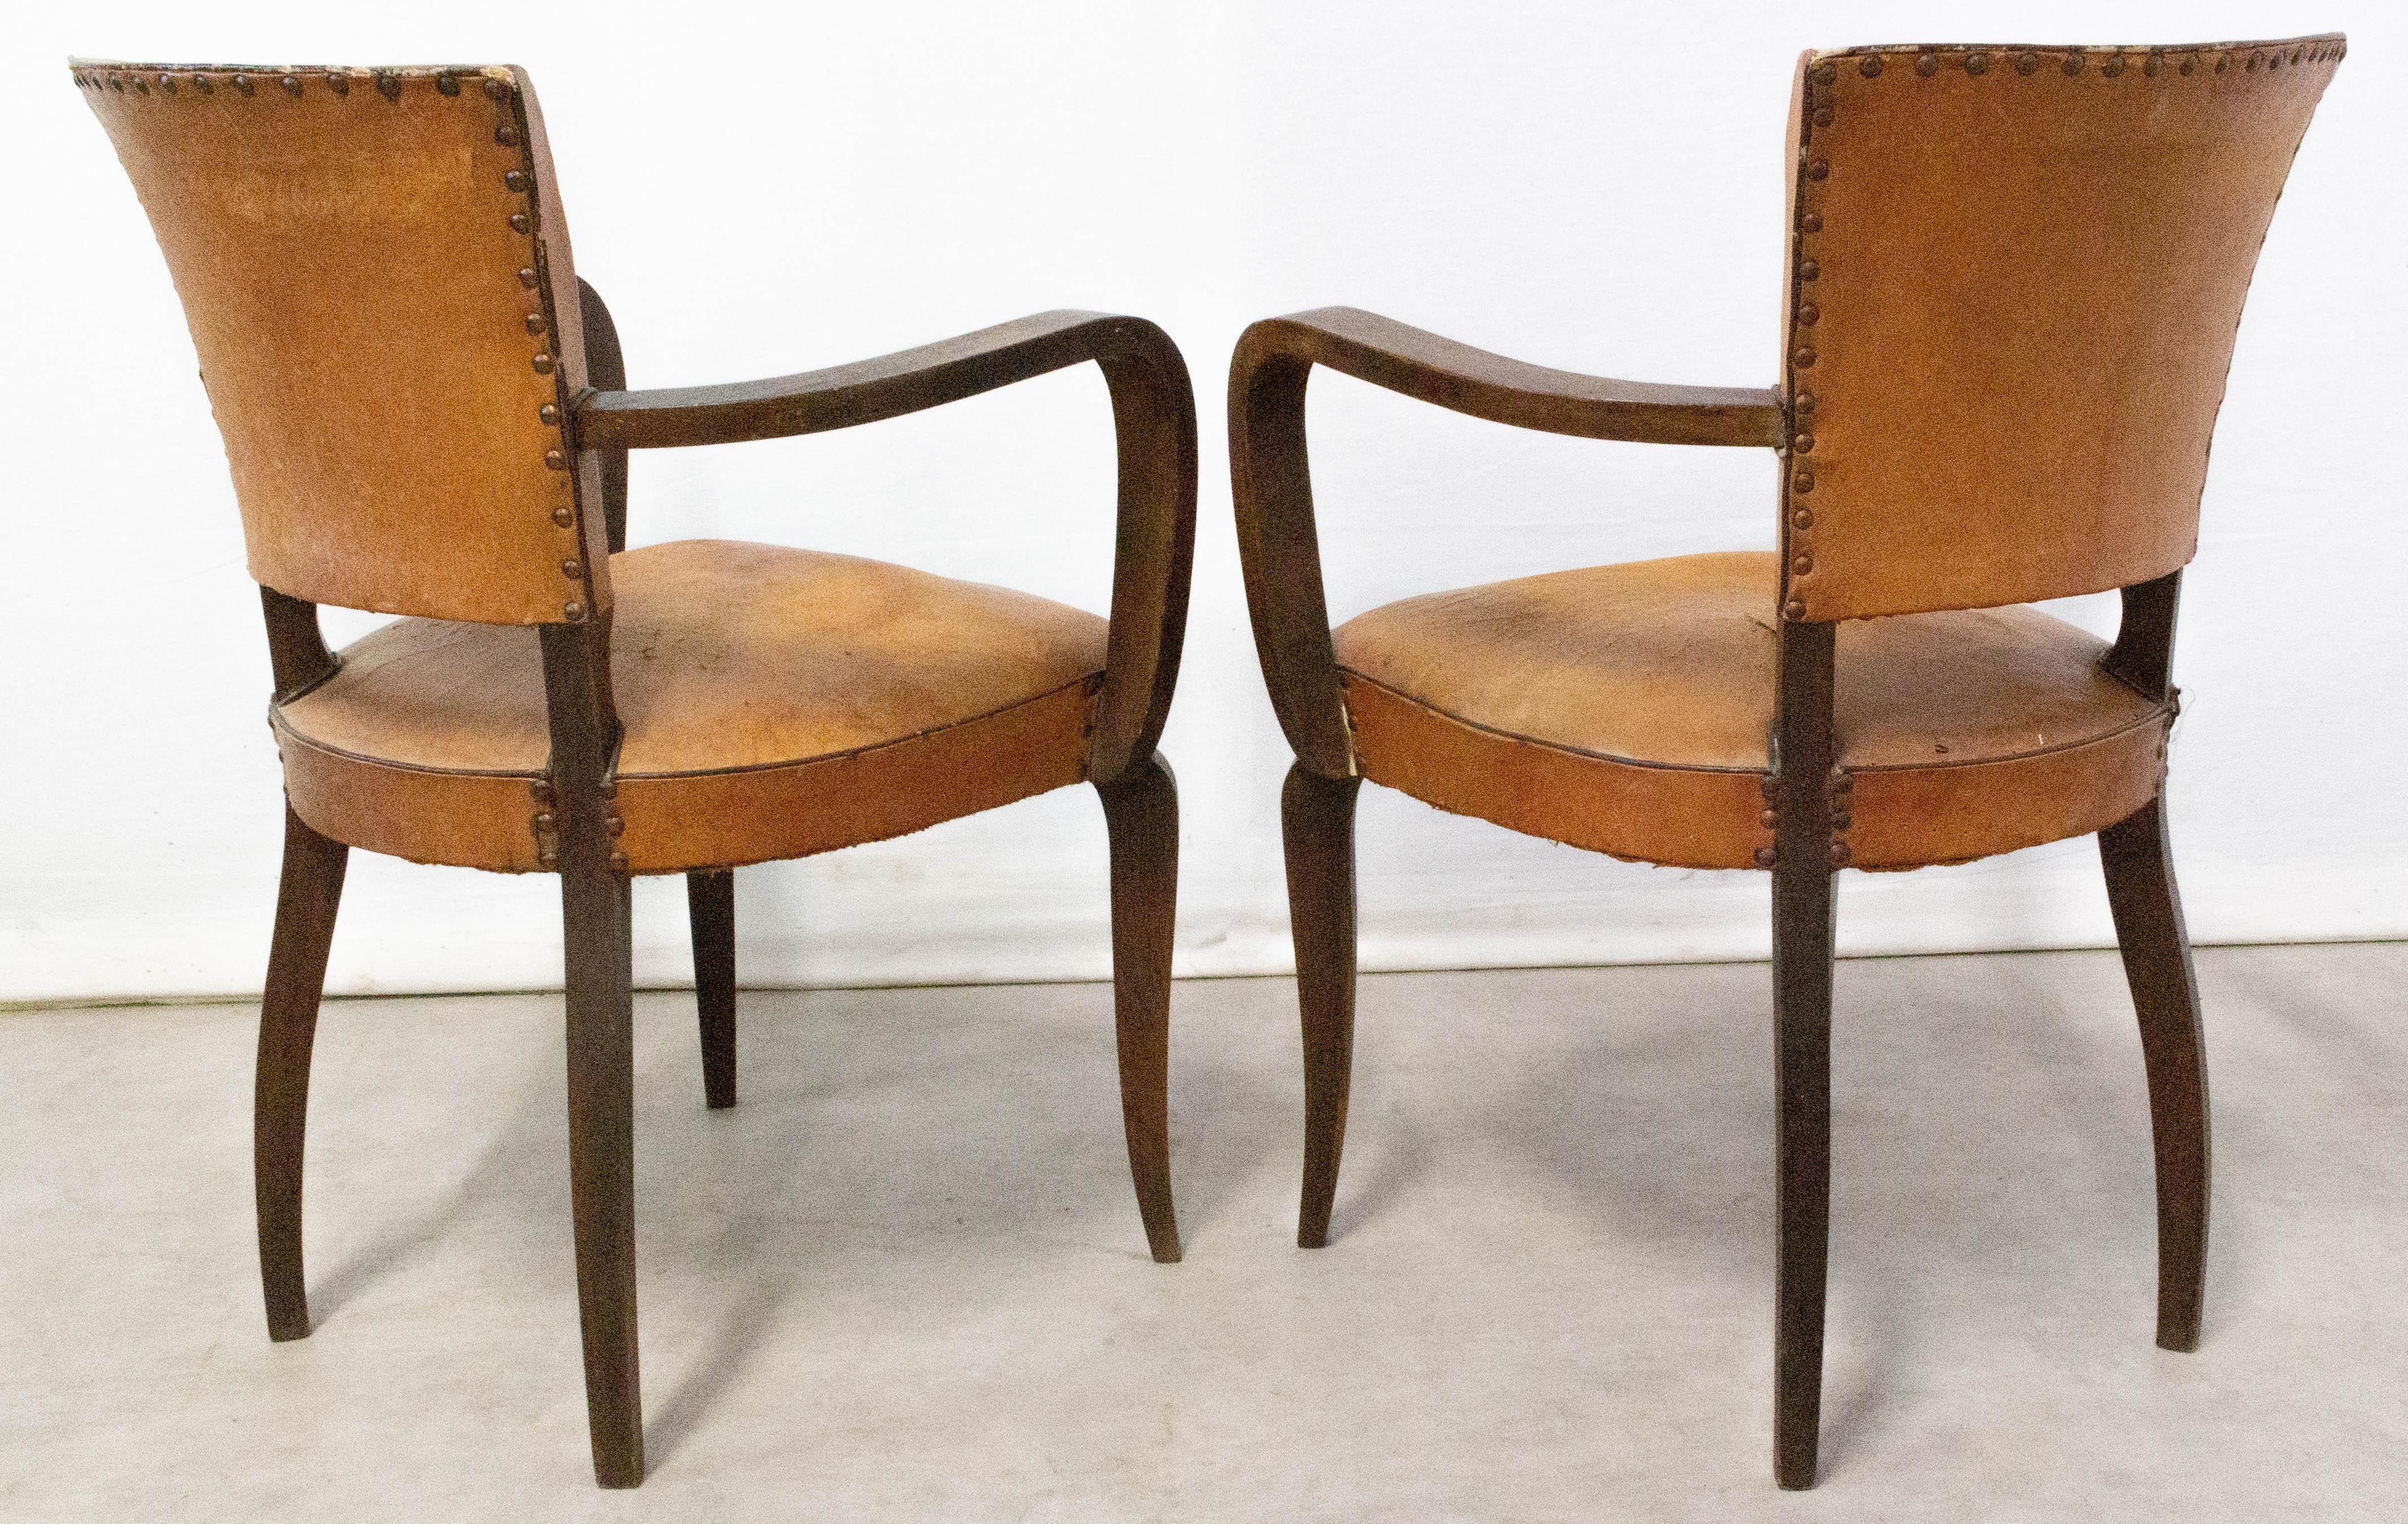 20th Century Pair of Bridge Chairs Leather French Art Deco circa 1930, to be Re-Upholstered